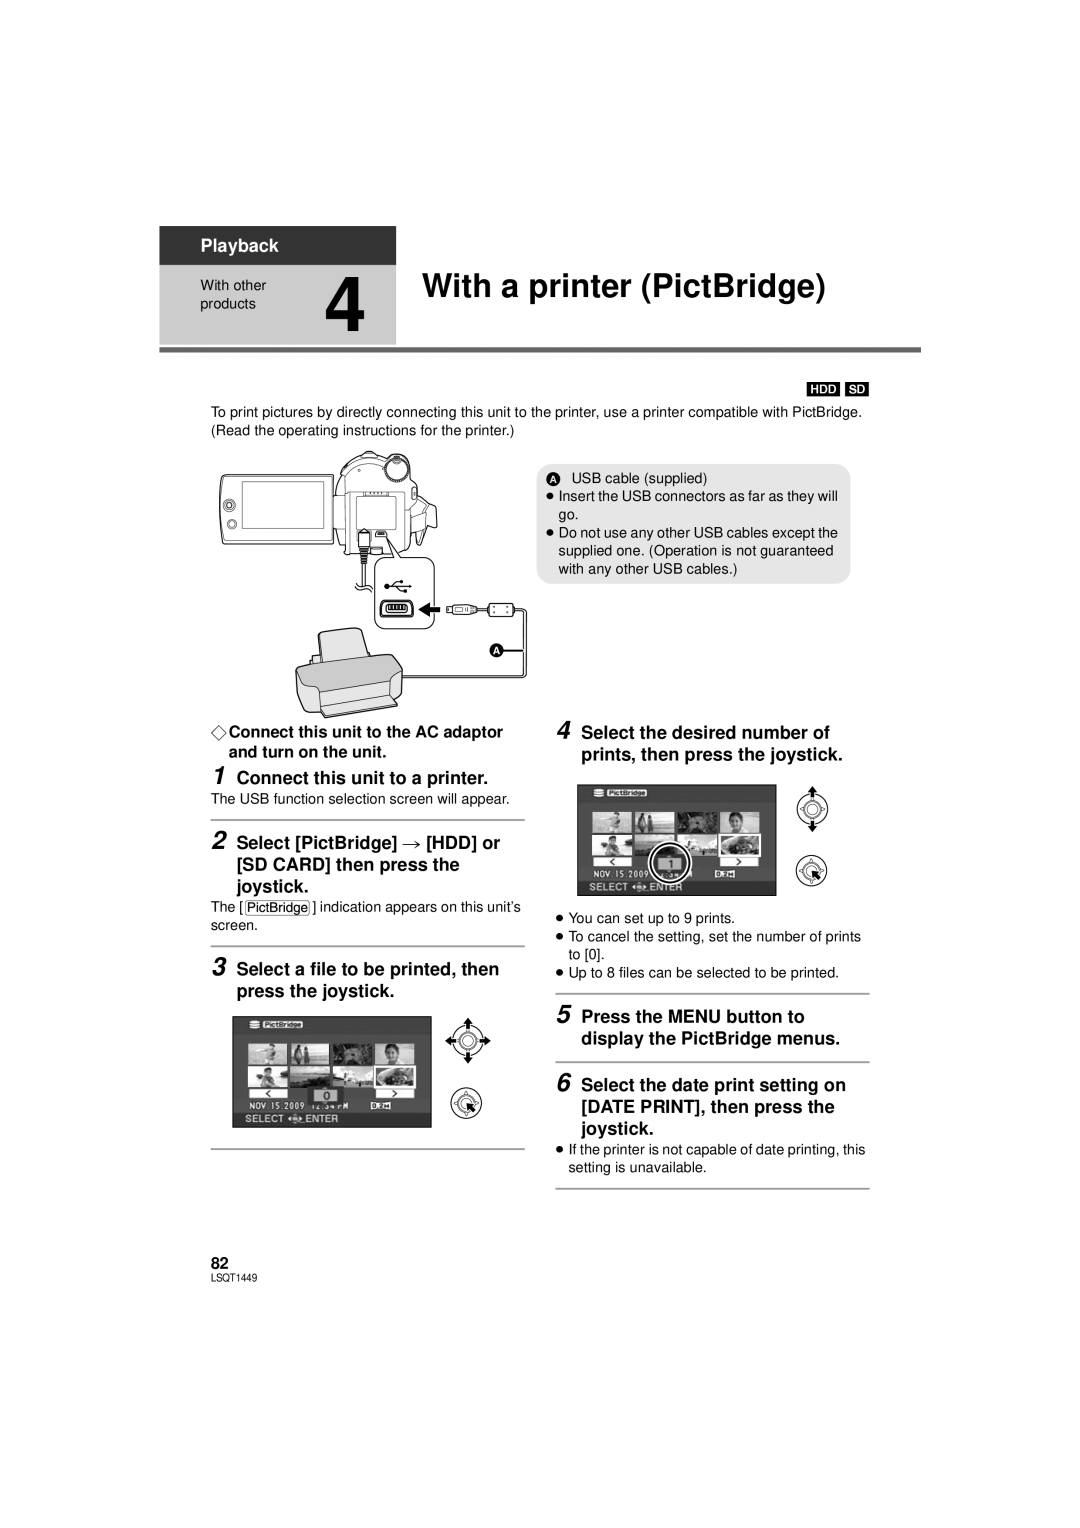 Panasonic SDR-H90PC, SDR-H80PC With a printer PictBridge, Connect this unit to a printer, Playback 